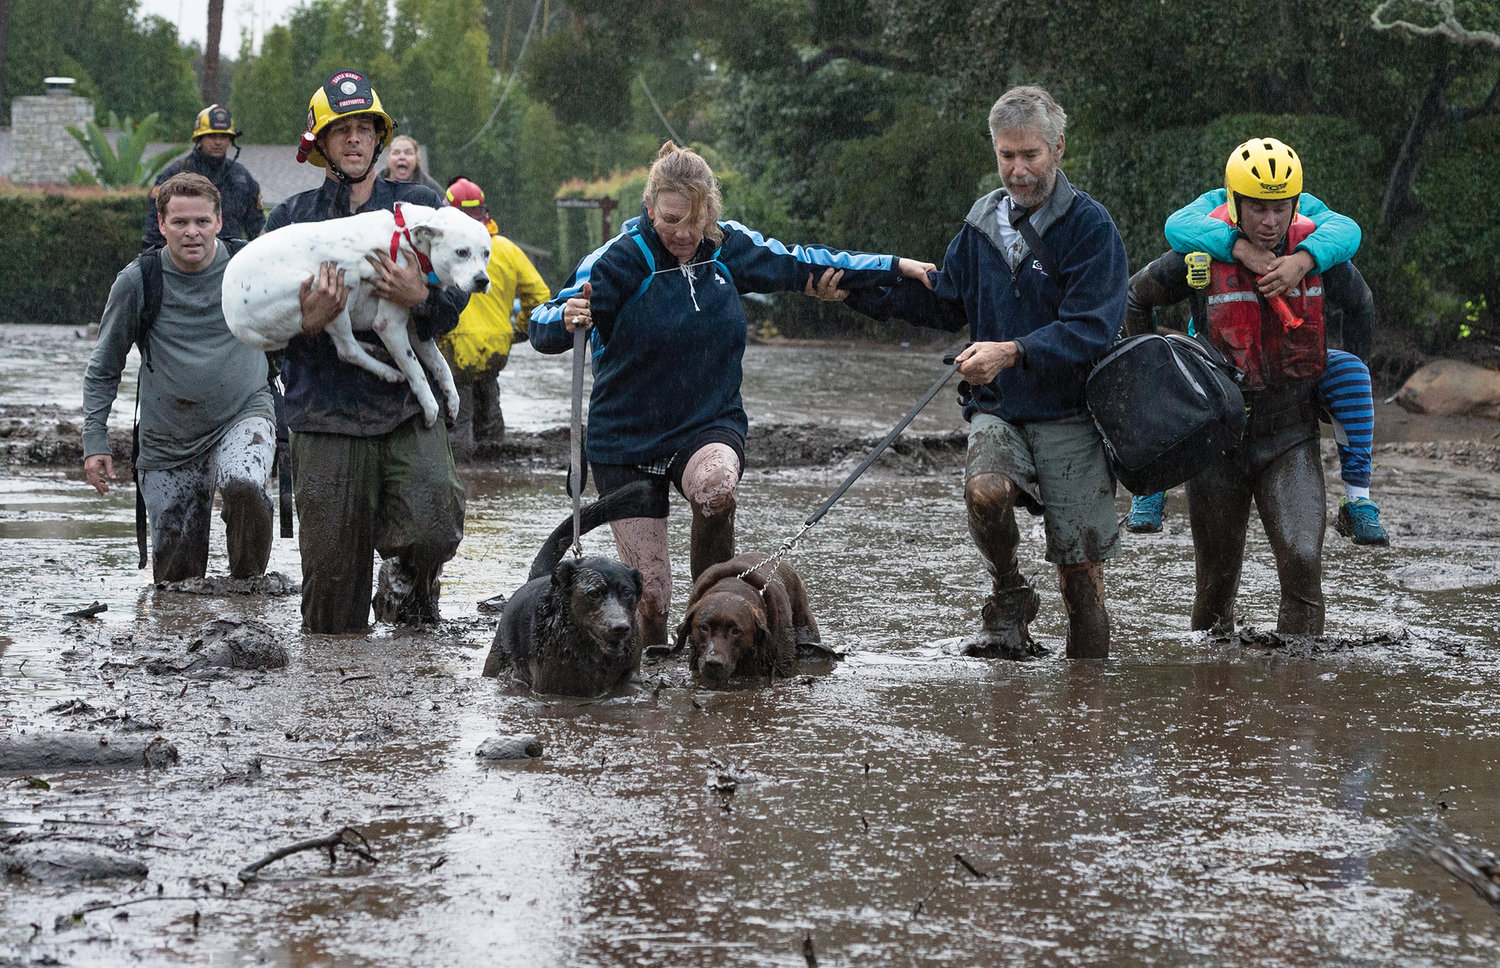 Firefighters and evacuated residents and dogs alike all struggle in knee-deep mud after Montecito, Calif. was hit with devastating mudslides on Jan. 9, 2018. Reports said at least 20 people were killed during the tragic event caused by torrential rain washing out hillsides, which were scorched bare by wildfires the month before. (Kenneth Song/Santa Barbara (Calif.) News-Press)